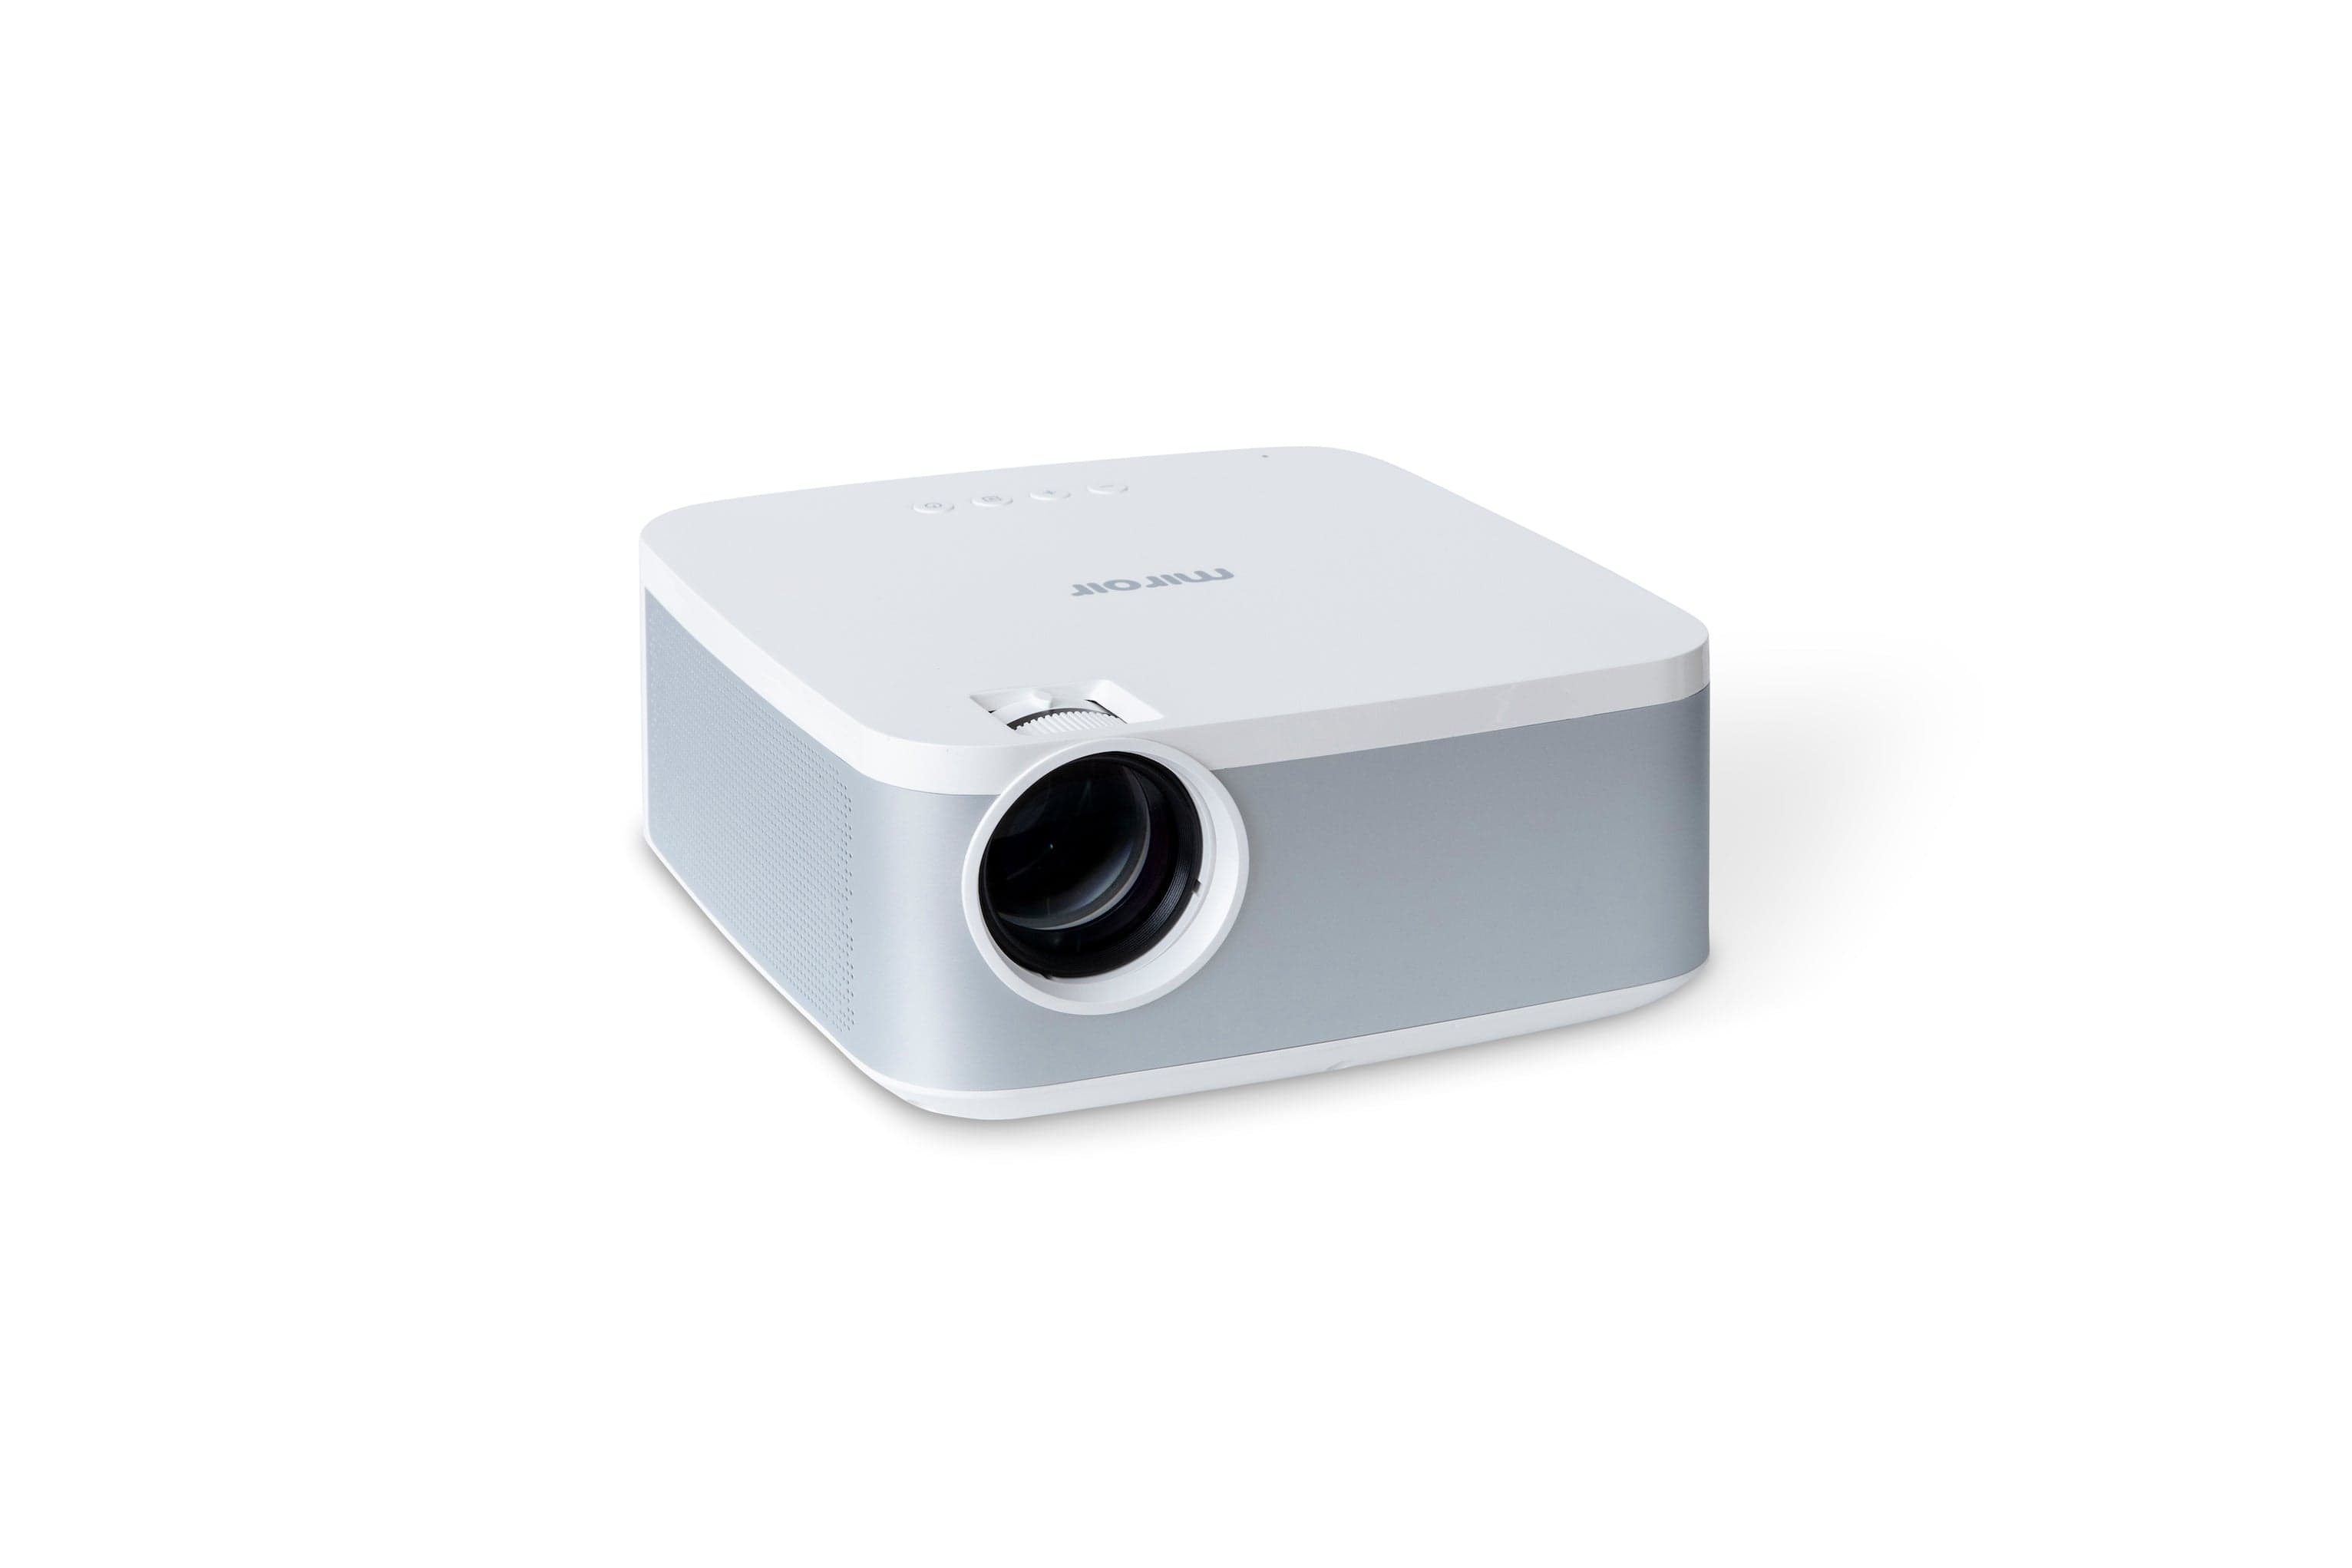 Miroir L500S Smart Wireless 1080p Projector, 5G Wireless & Bluetooth, 90-inch screen, built-in streaming for Netflix, for the ultimate home cinema experience.